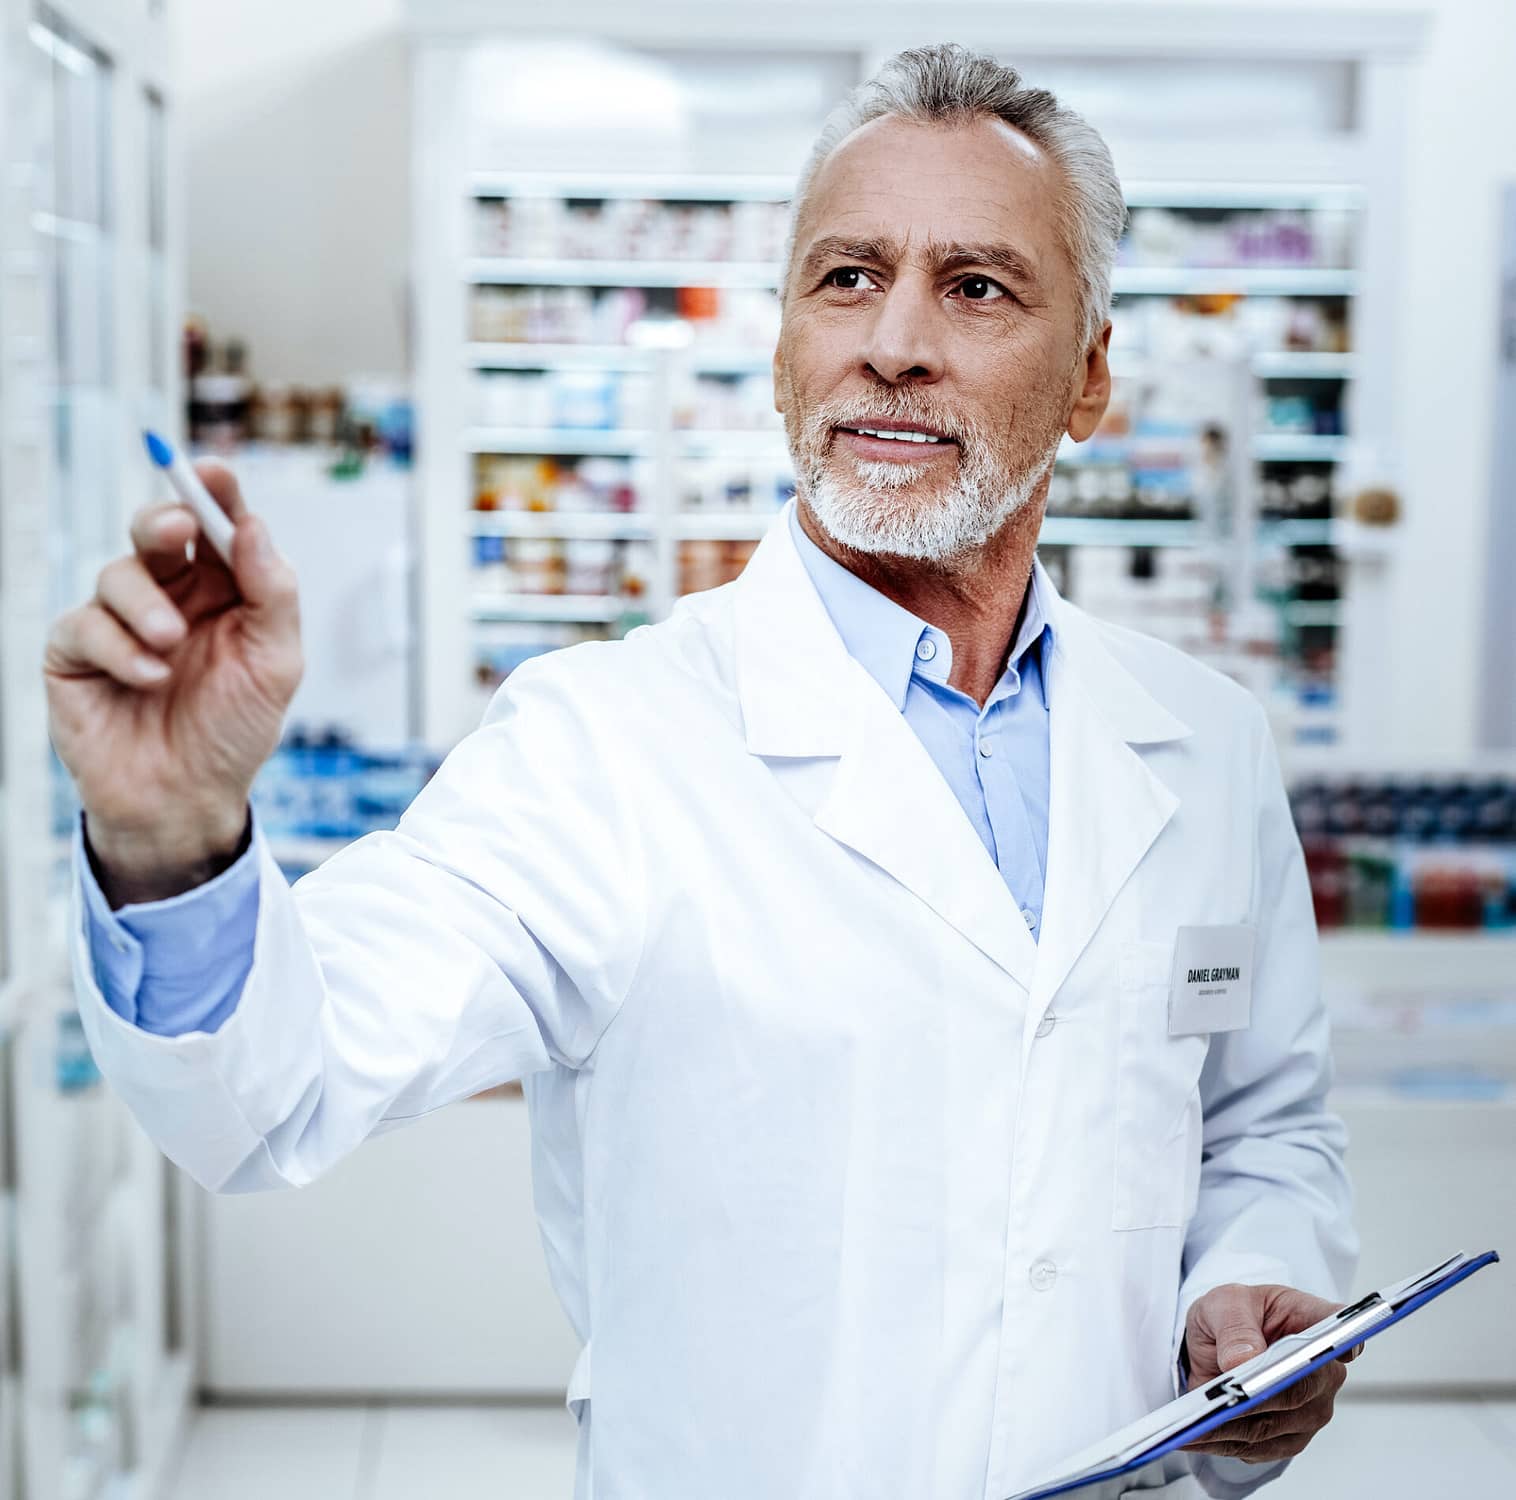 Report. Handsome bearded pharmacist in a white coat looking busy while preparing a report